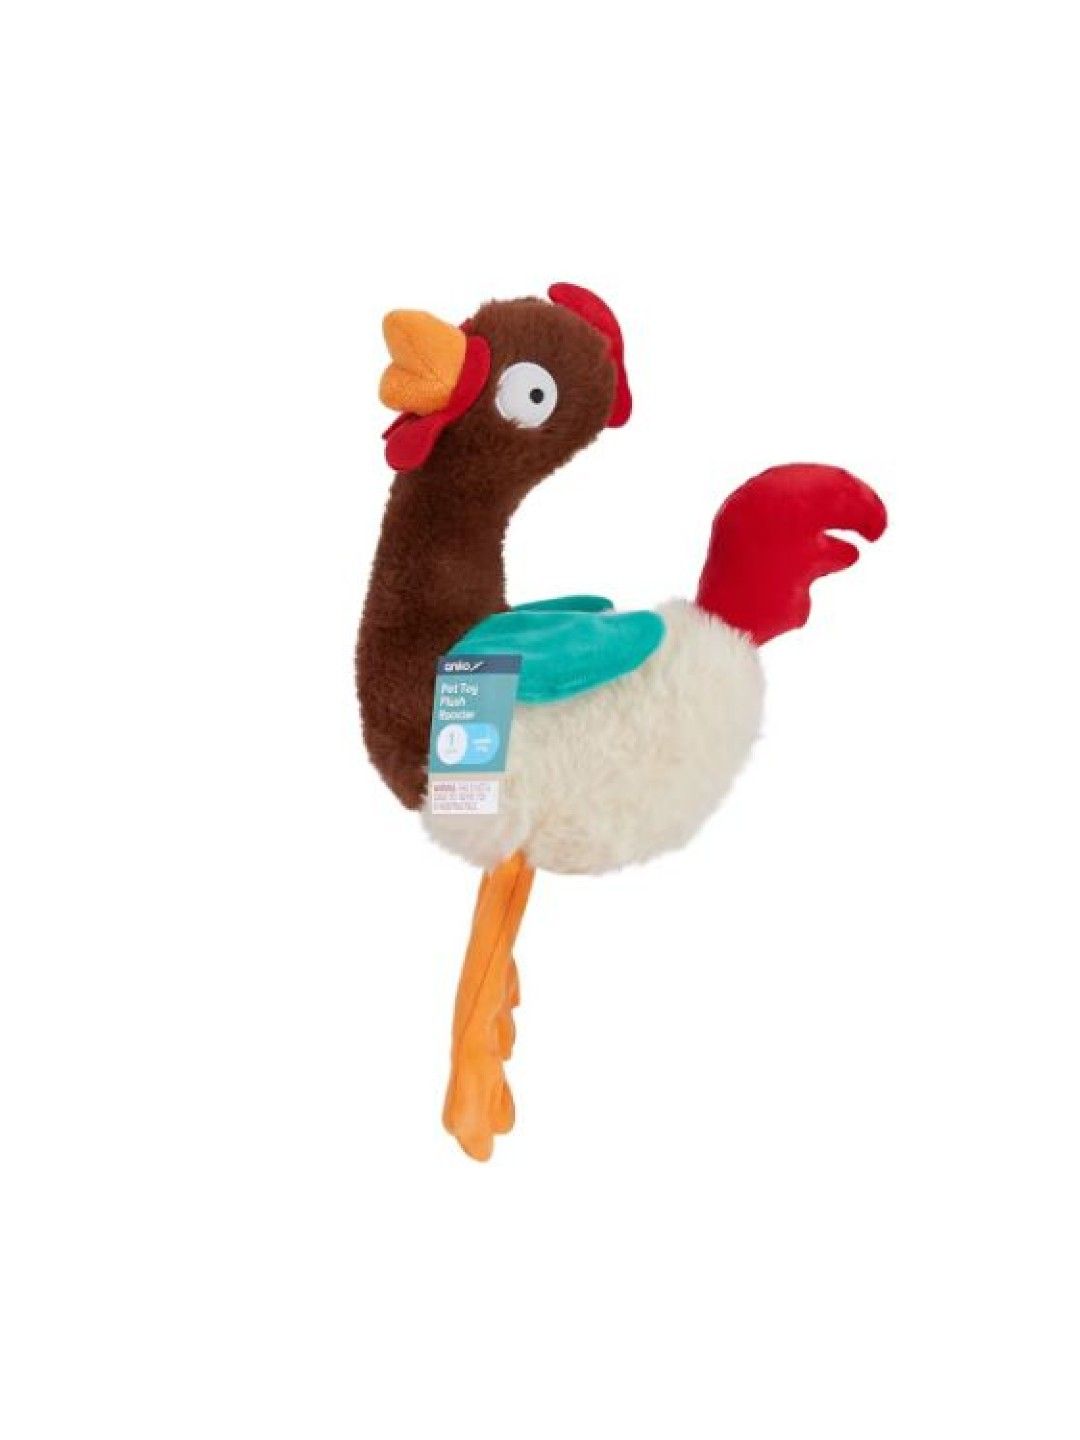 Anko Pet Toy Plush Rooster (Multicolor- Image 2)